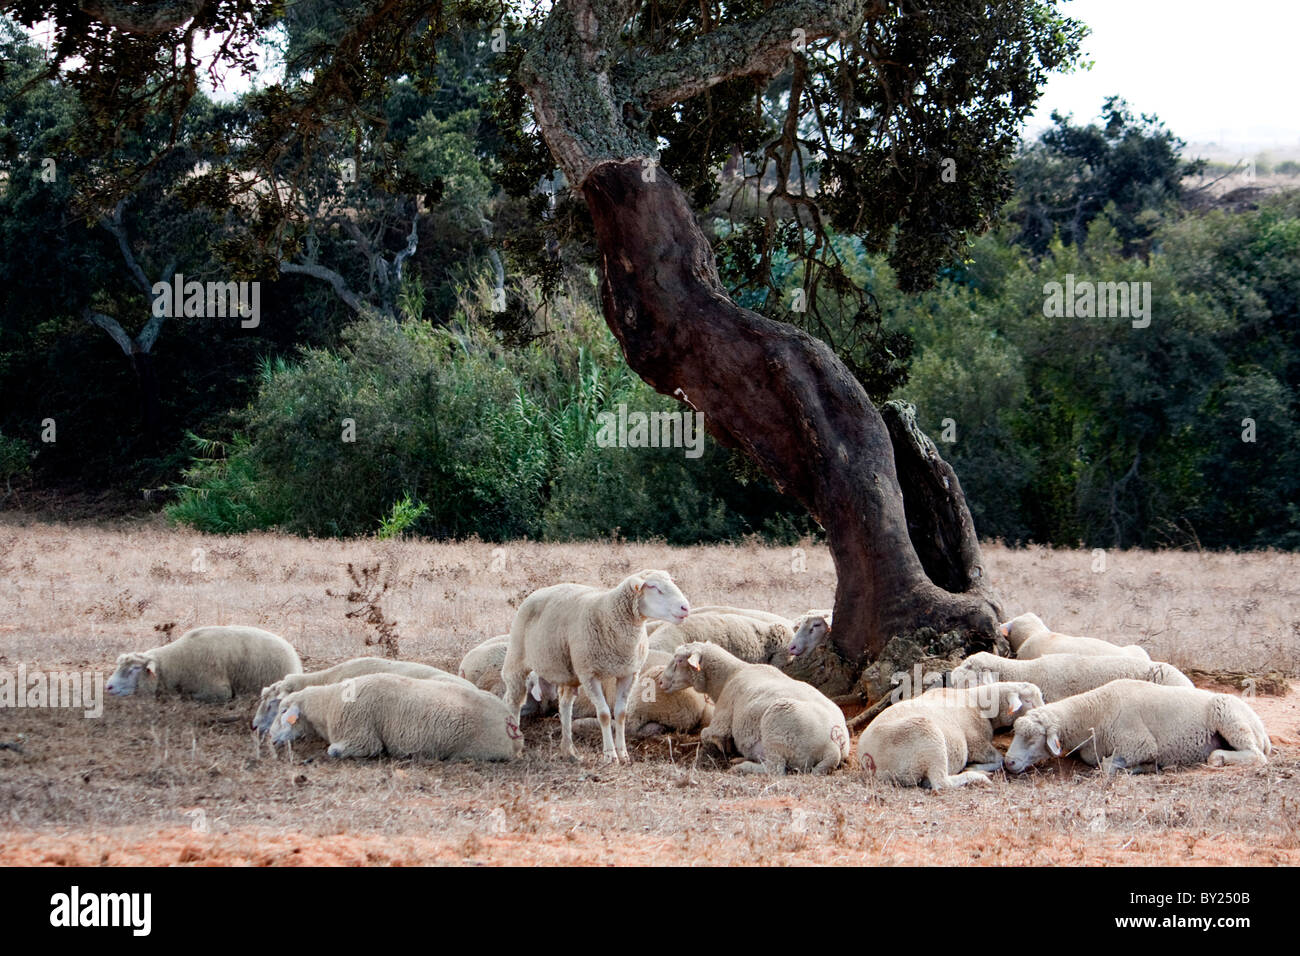 View of several sheep sleeping under a tree. Stock Photo